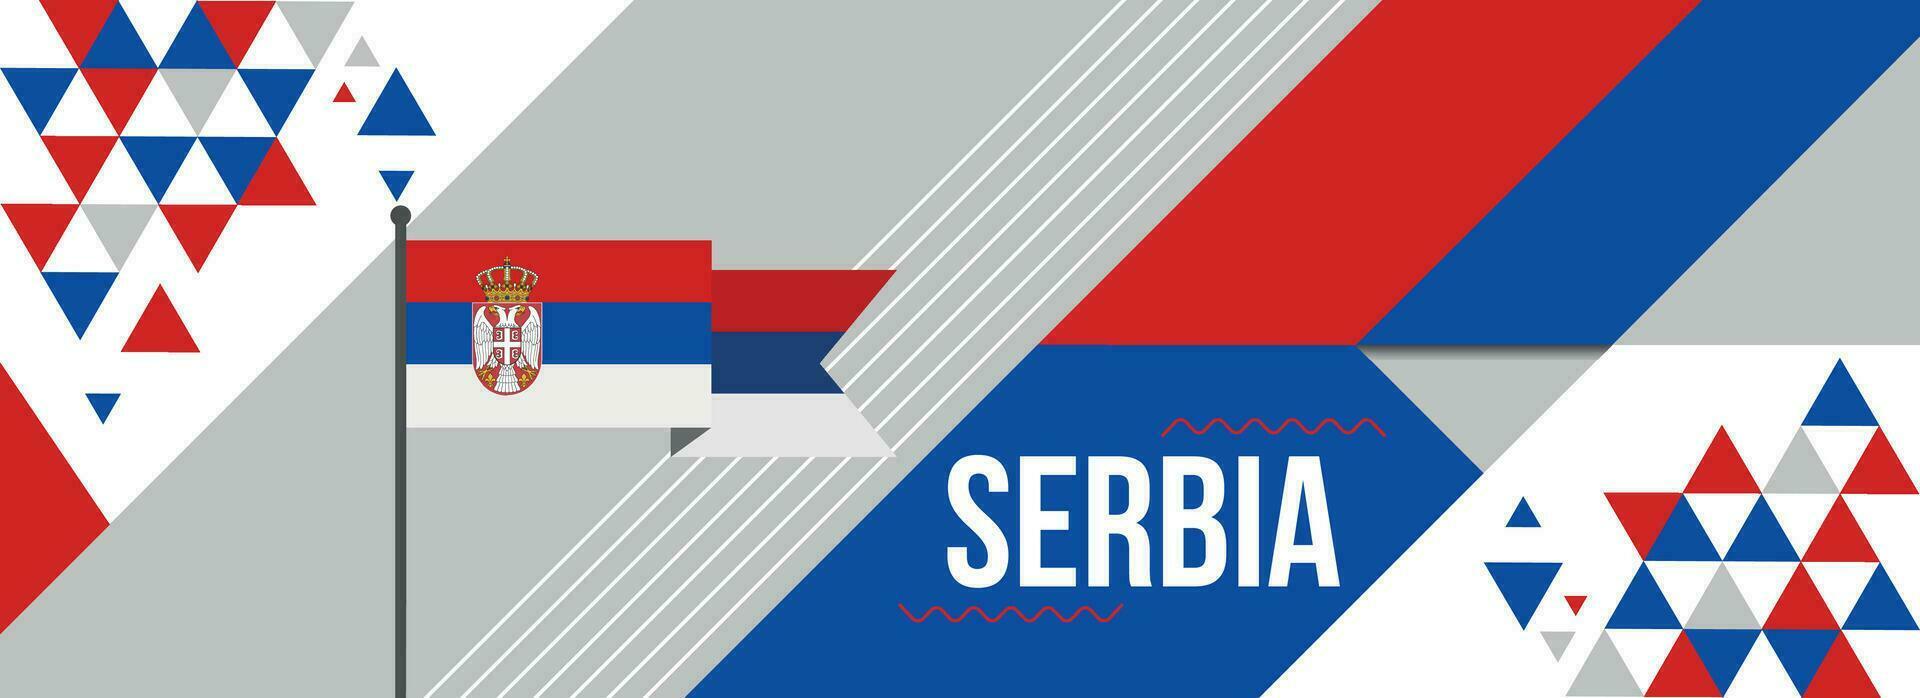 Serbia national or independence day banner design for country celebration. Flag of Serbia  with modern retro design and abstract geometric icons. Vector illustration.